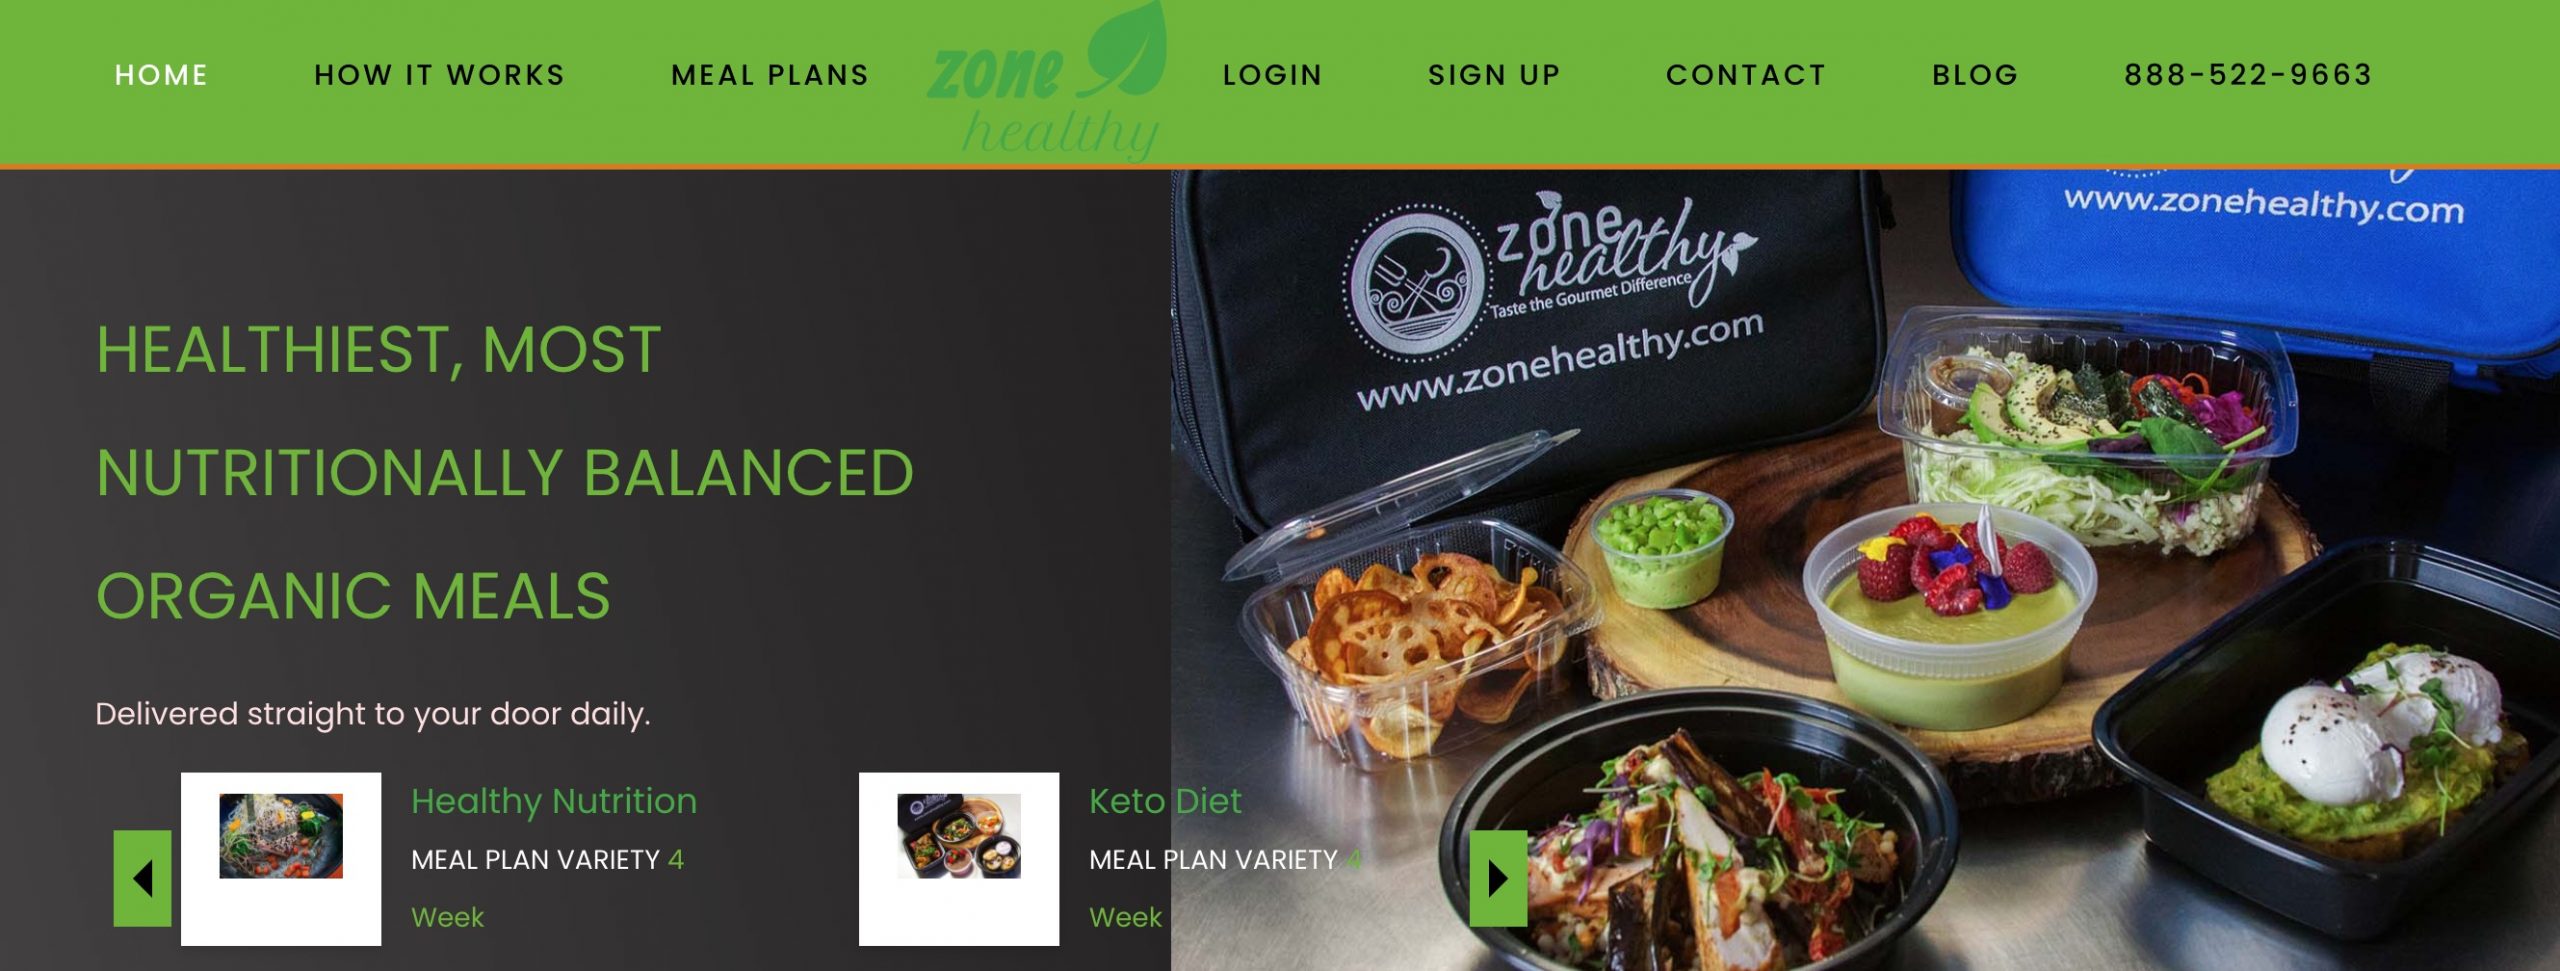 Zone Healthy main page